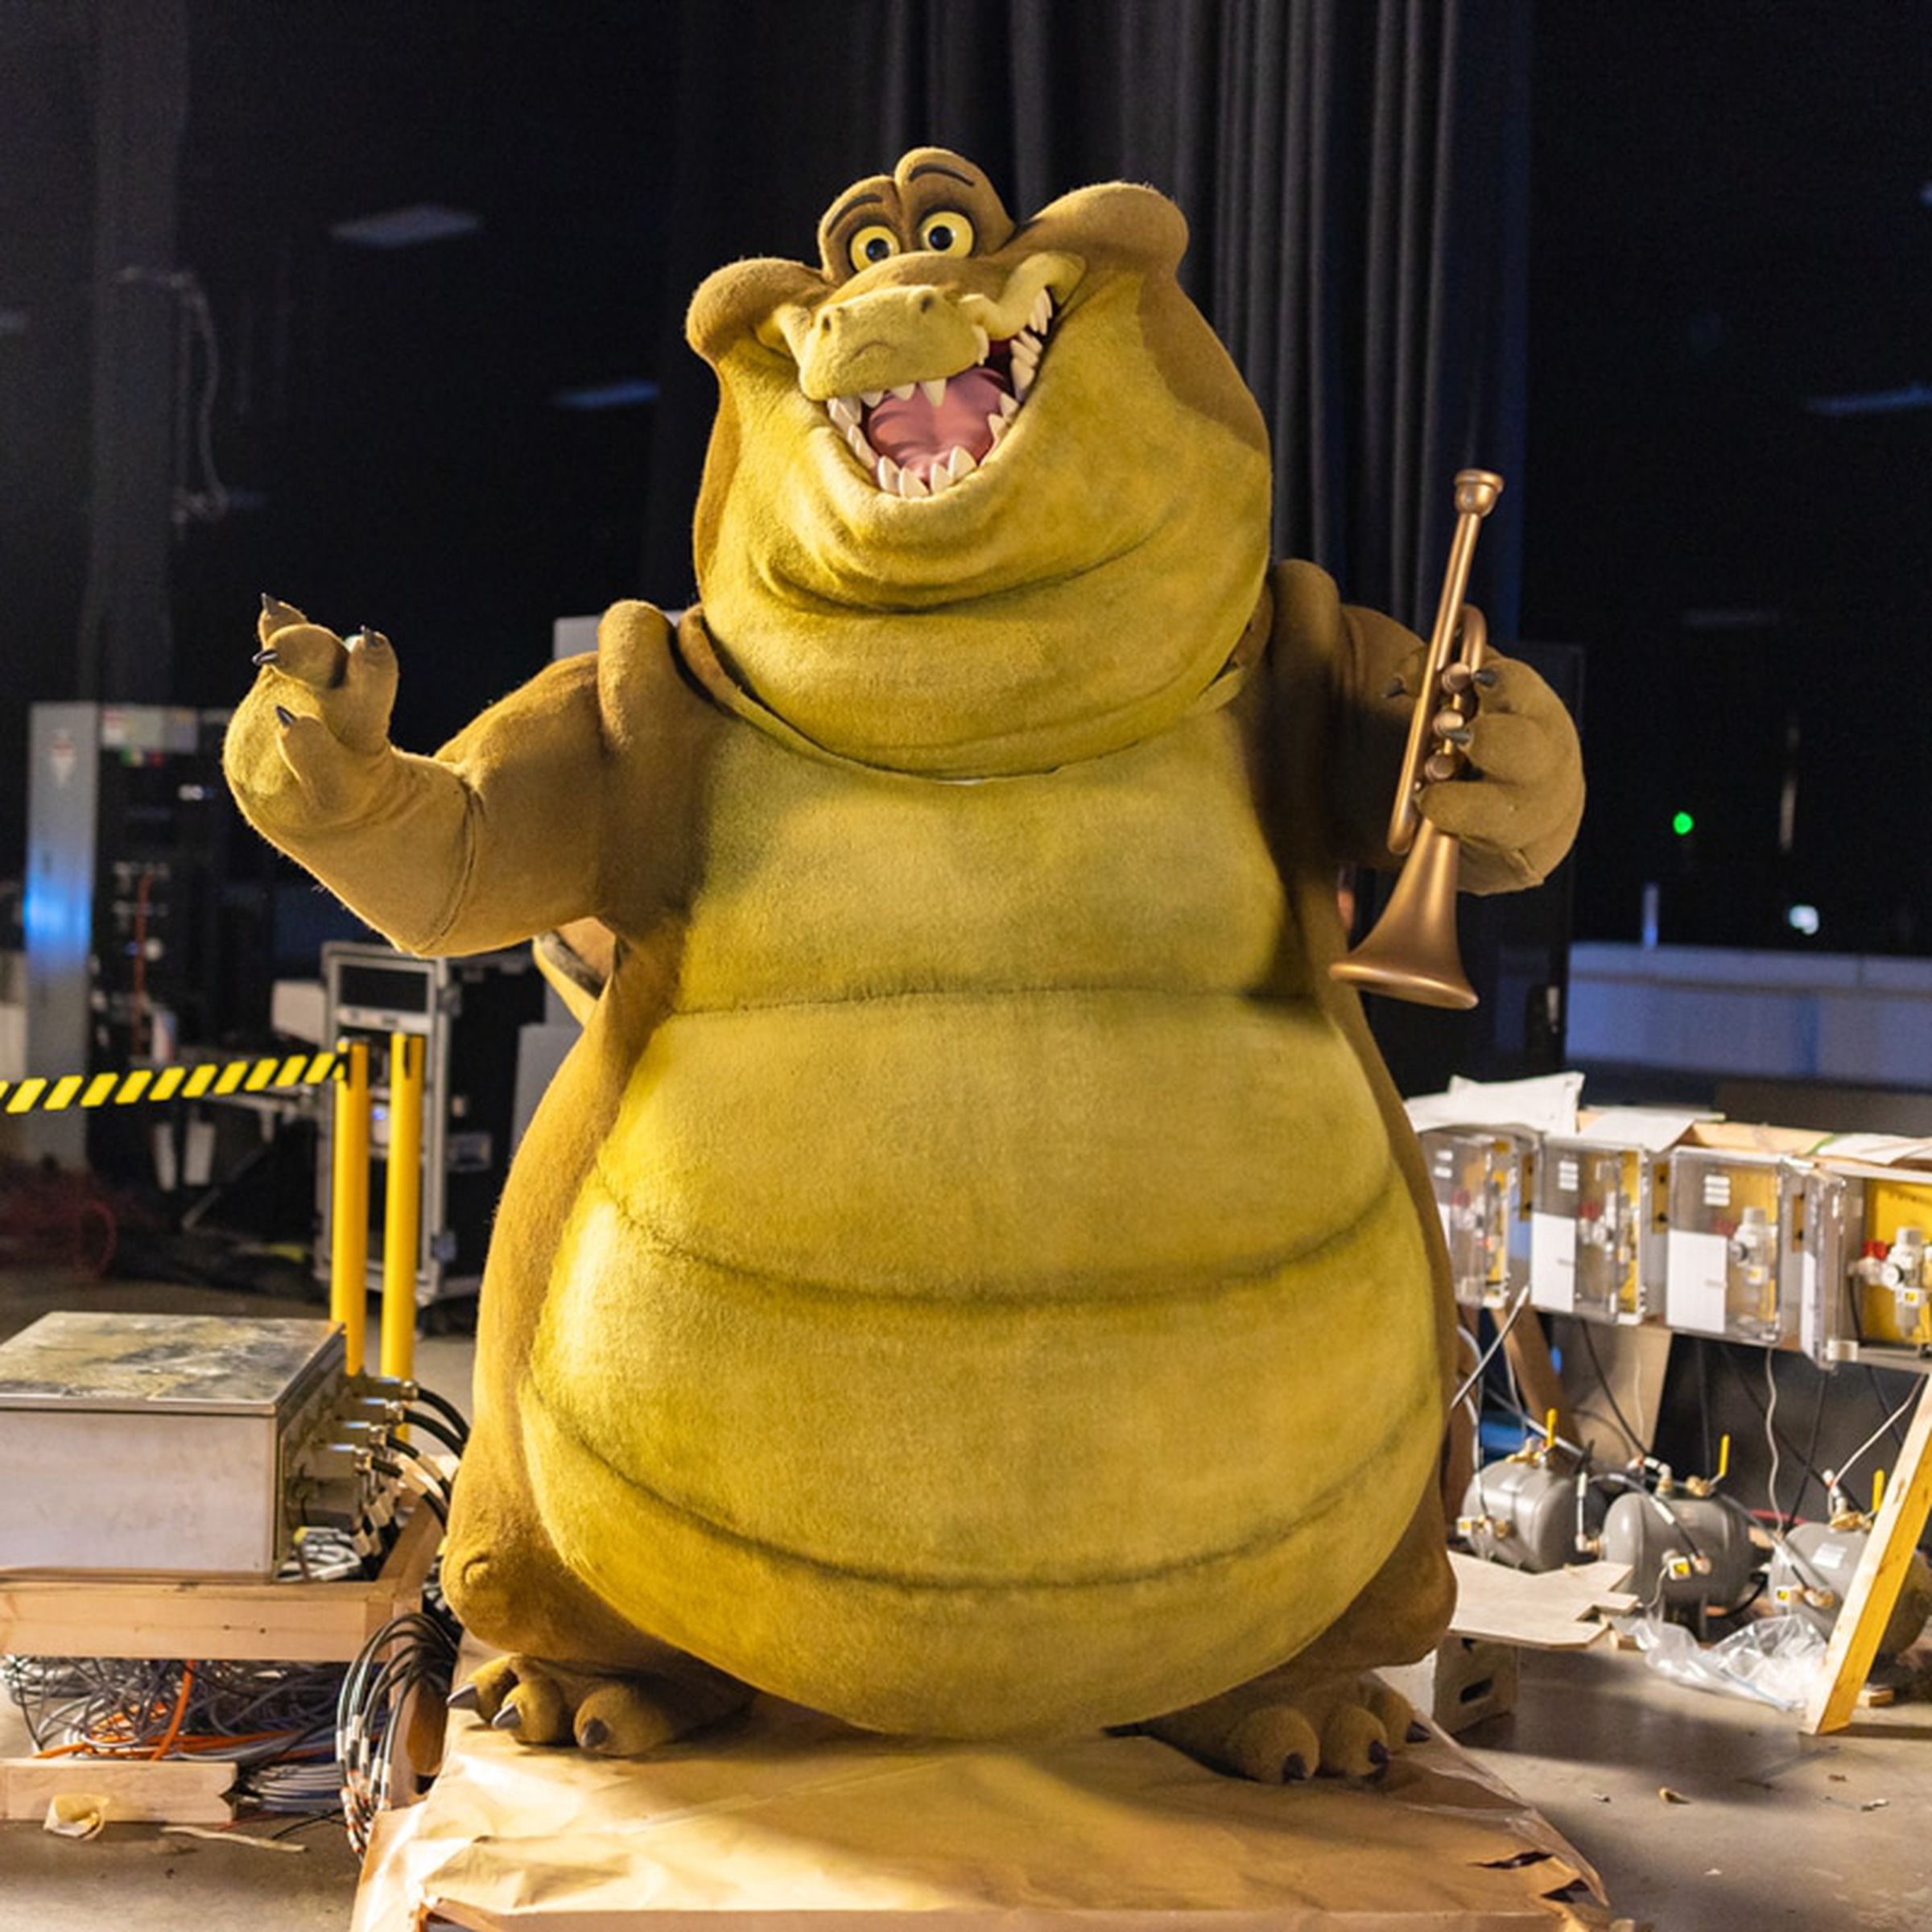 A picture of the Louis the Aligator animatronic from Disney’s Tiana’s Bayou Adventure ride.